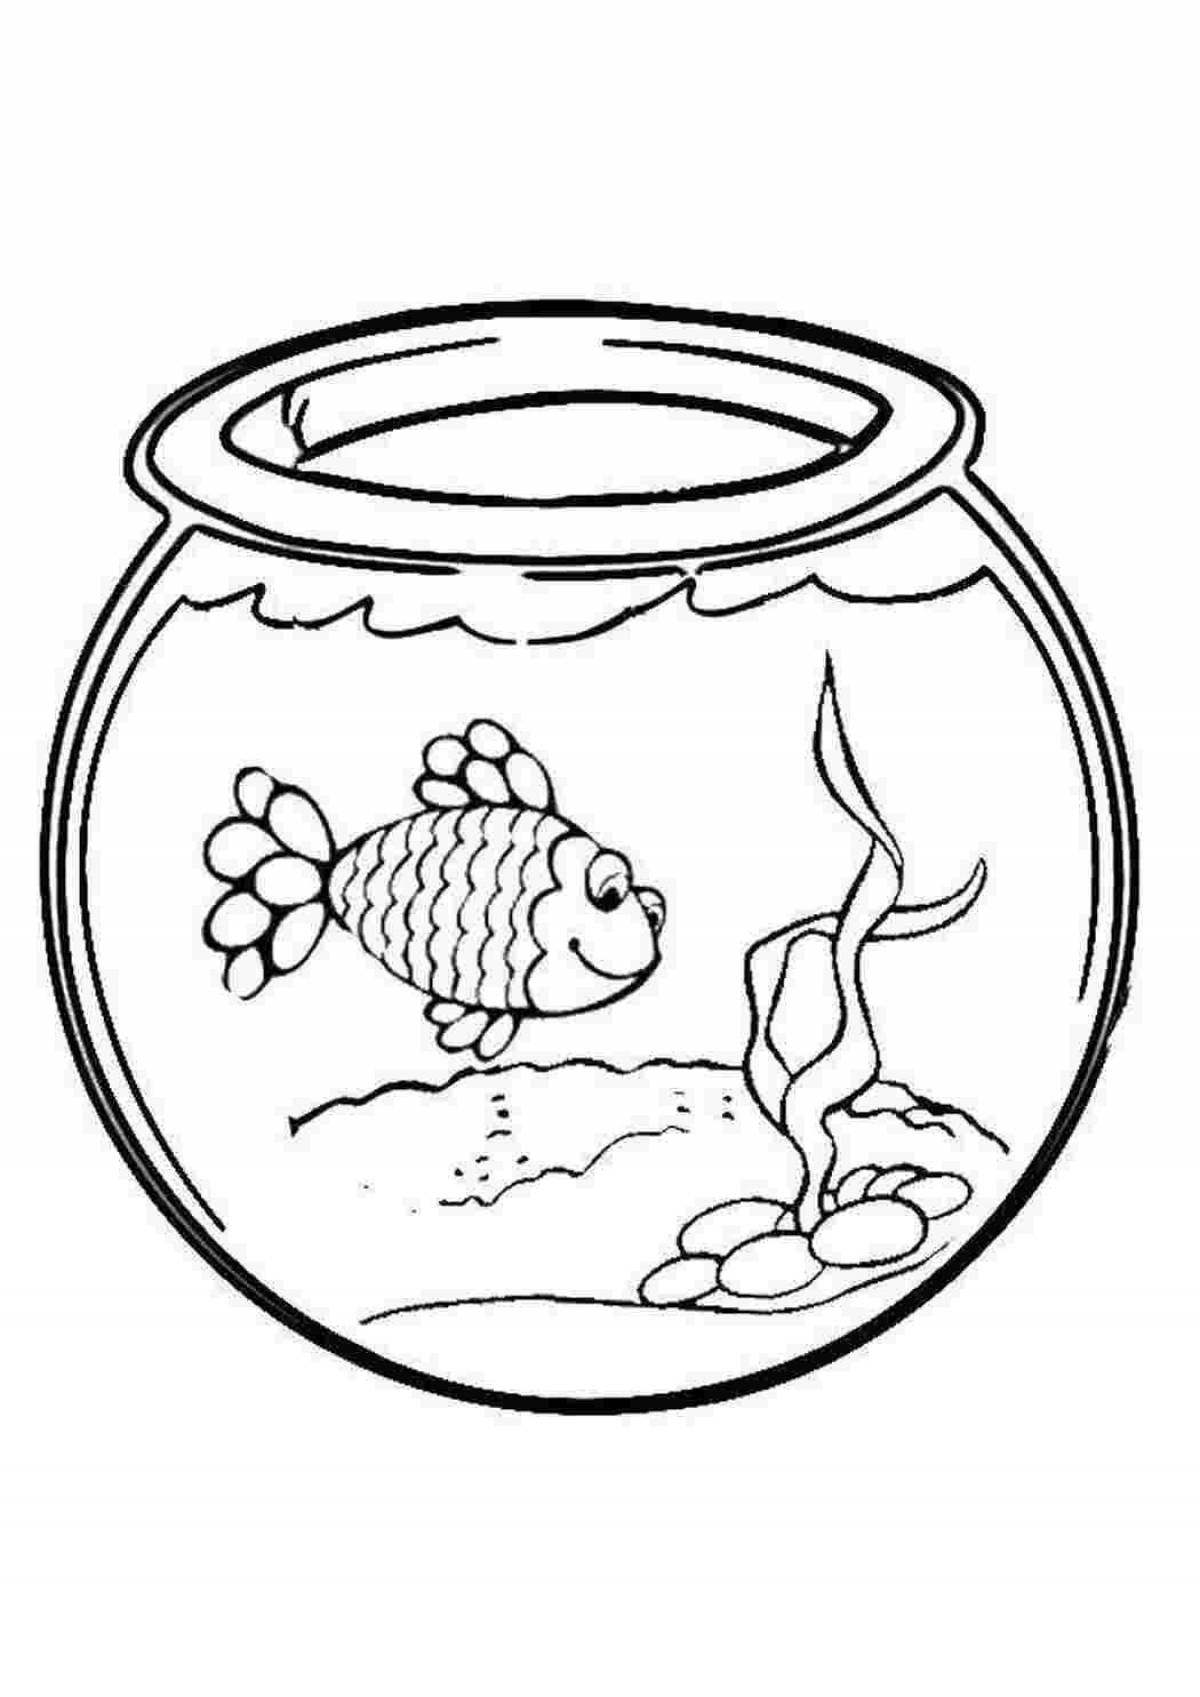 Animated aquarium coloring page for 3-4 year olds